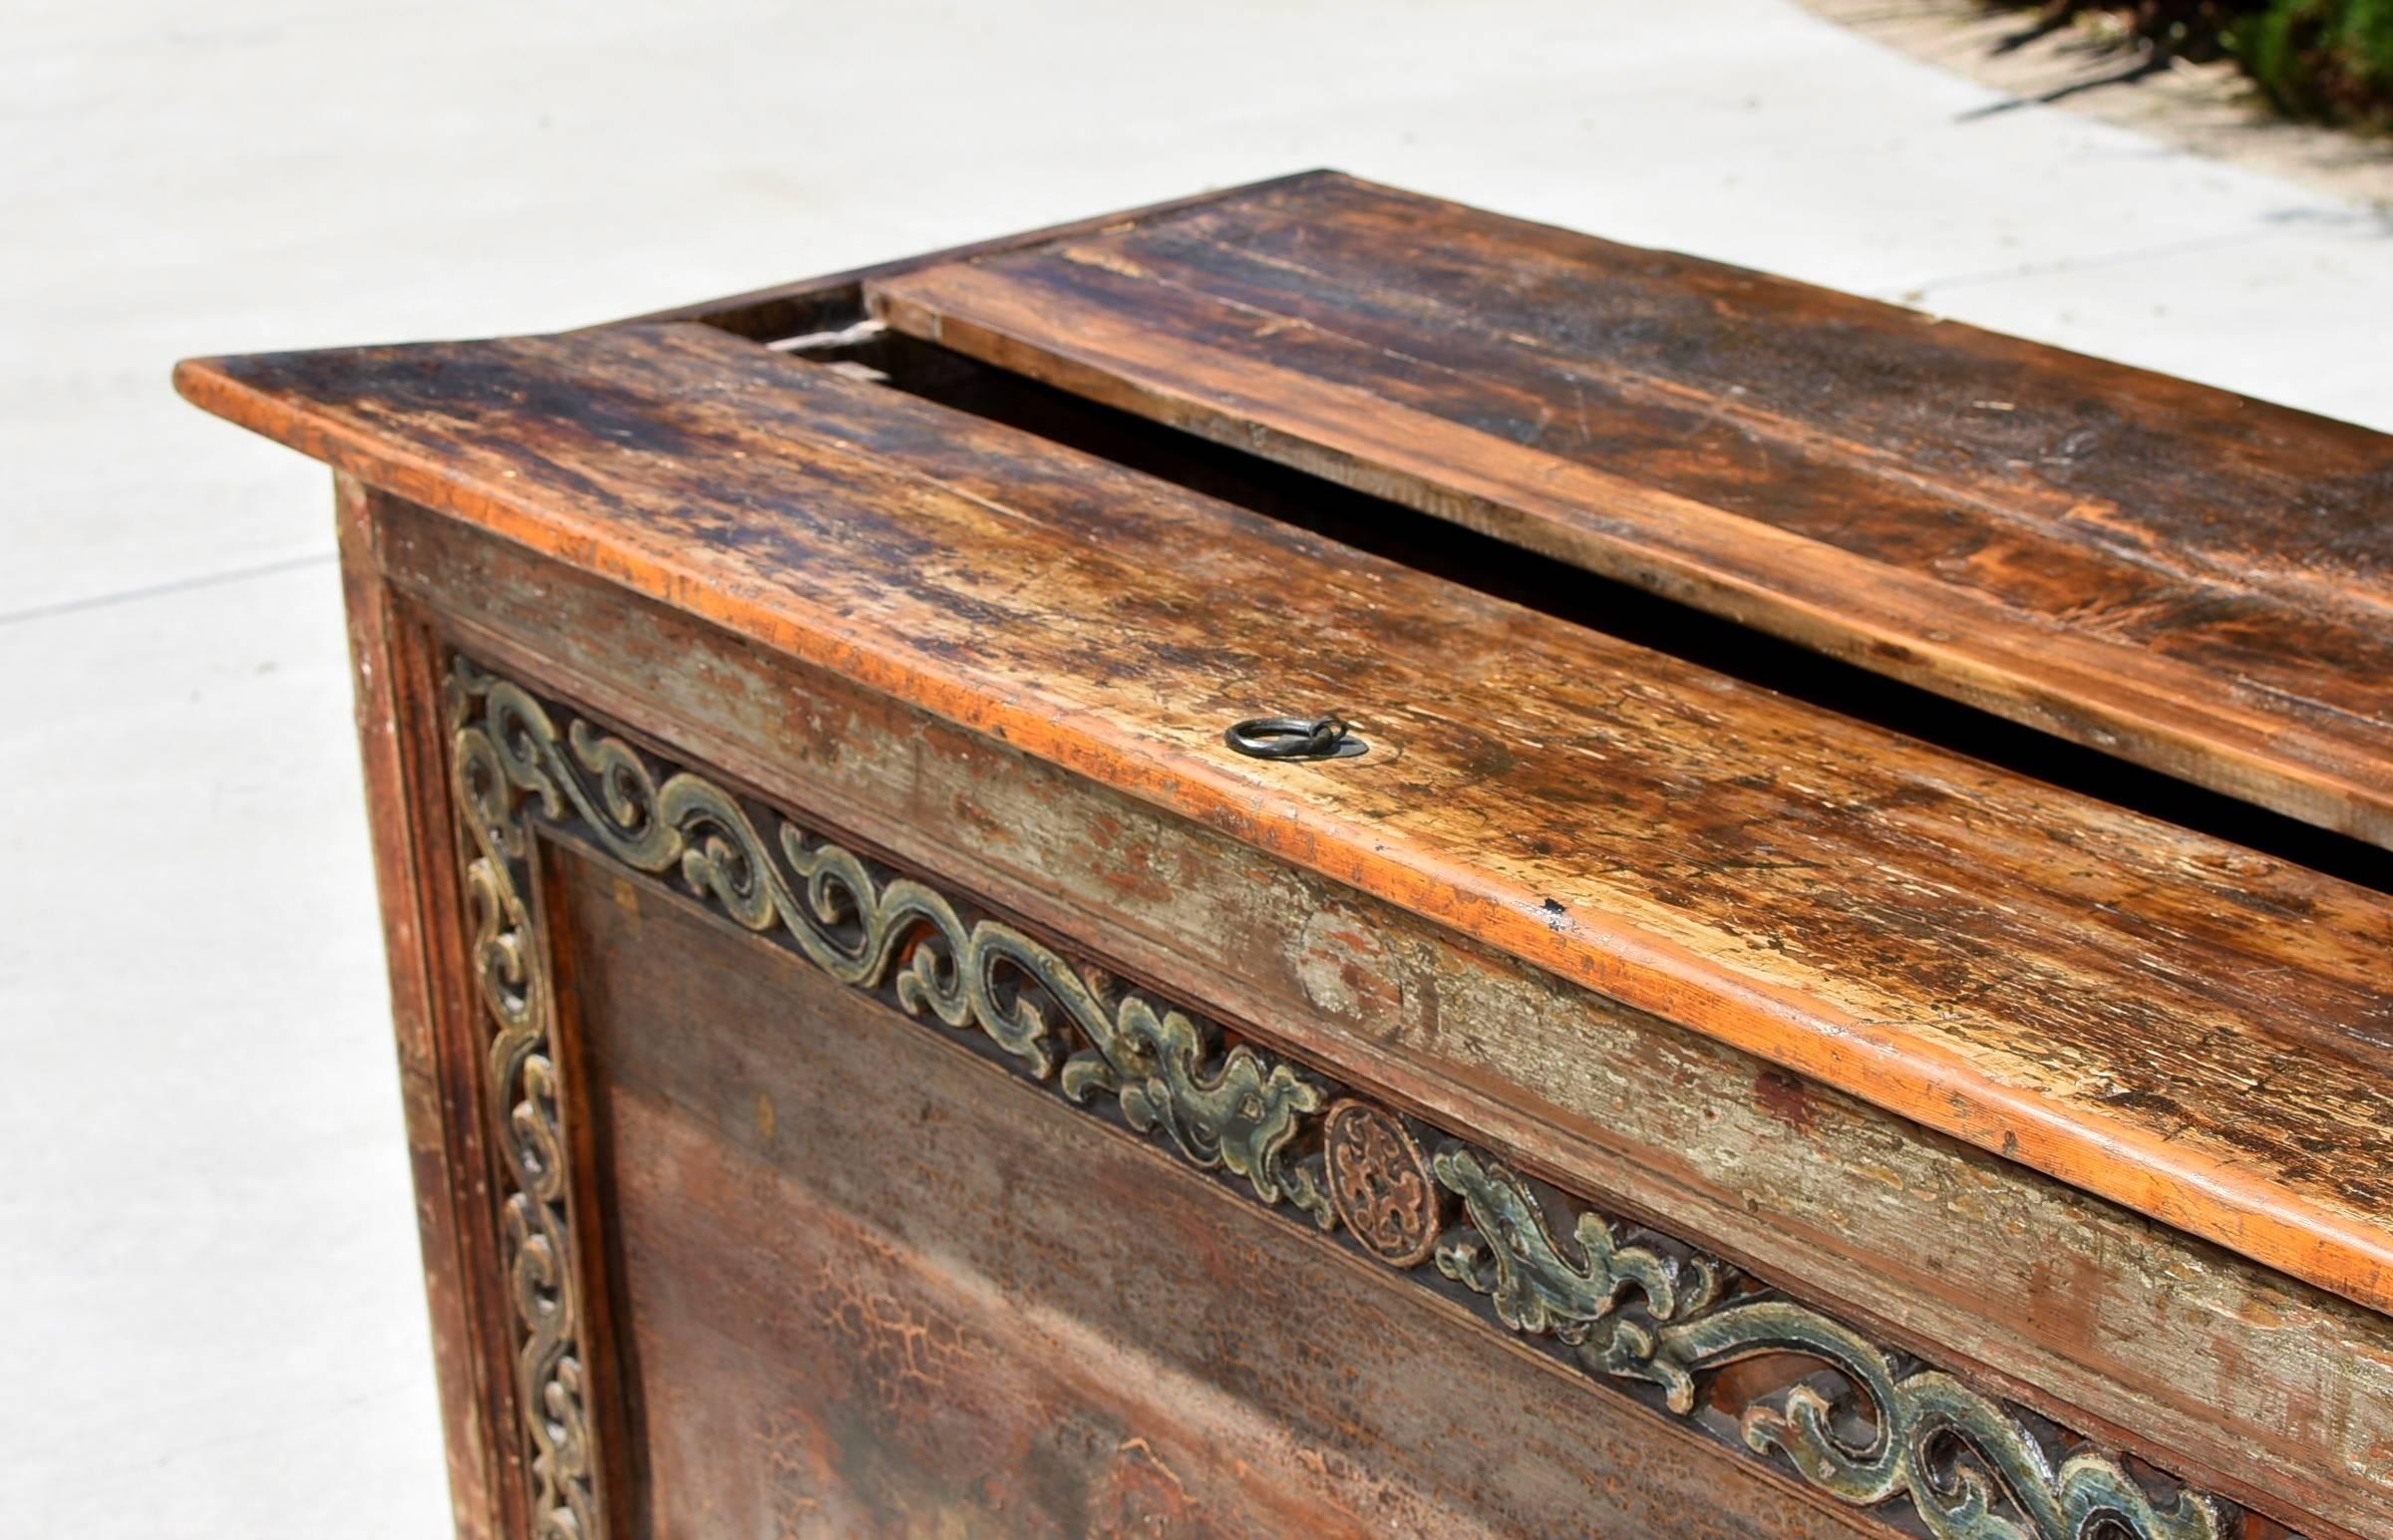 Wood Original Early 19th Century Mongolian Chest with Painted Foo Dogs For Sale